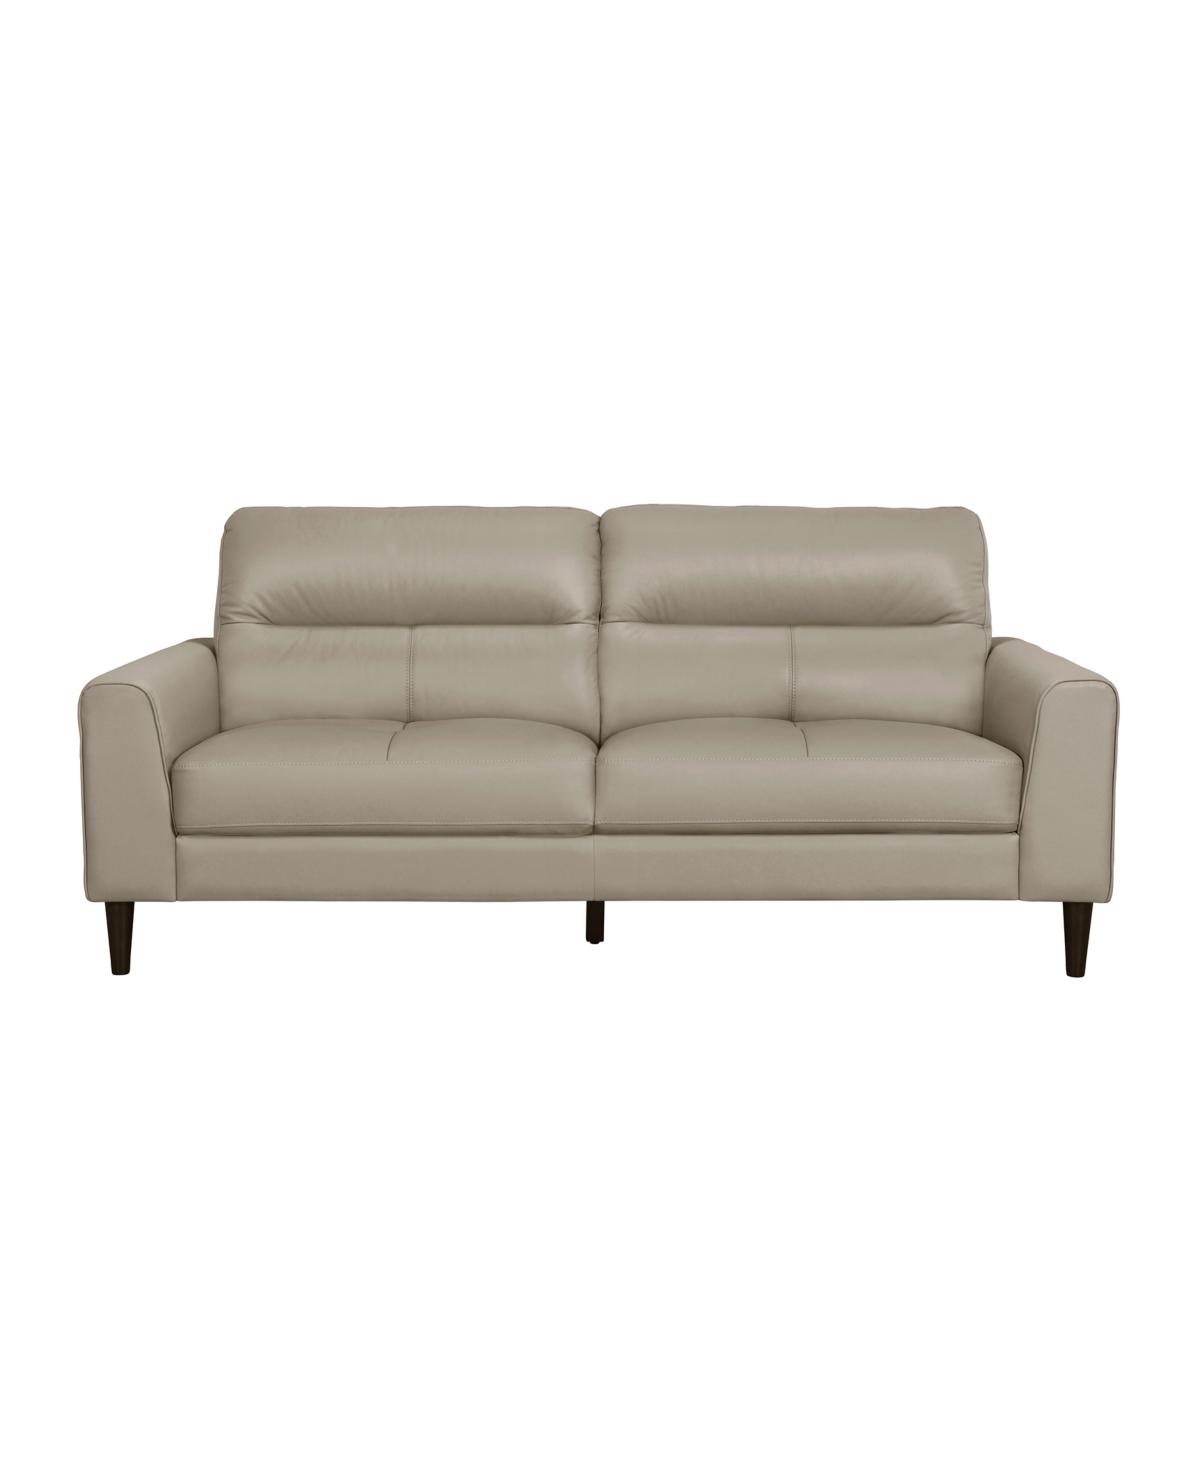 Shop Homelegance White Label Tabor 76" Leather Match Sofa In Beige